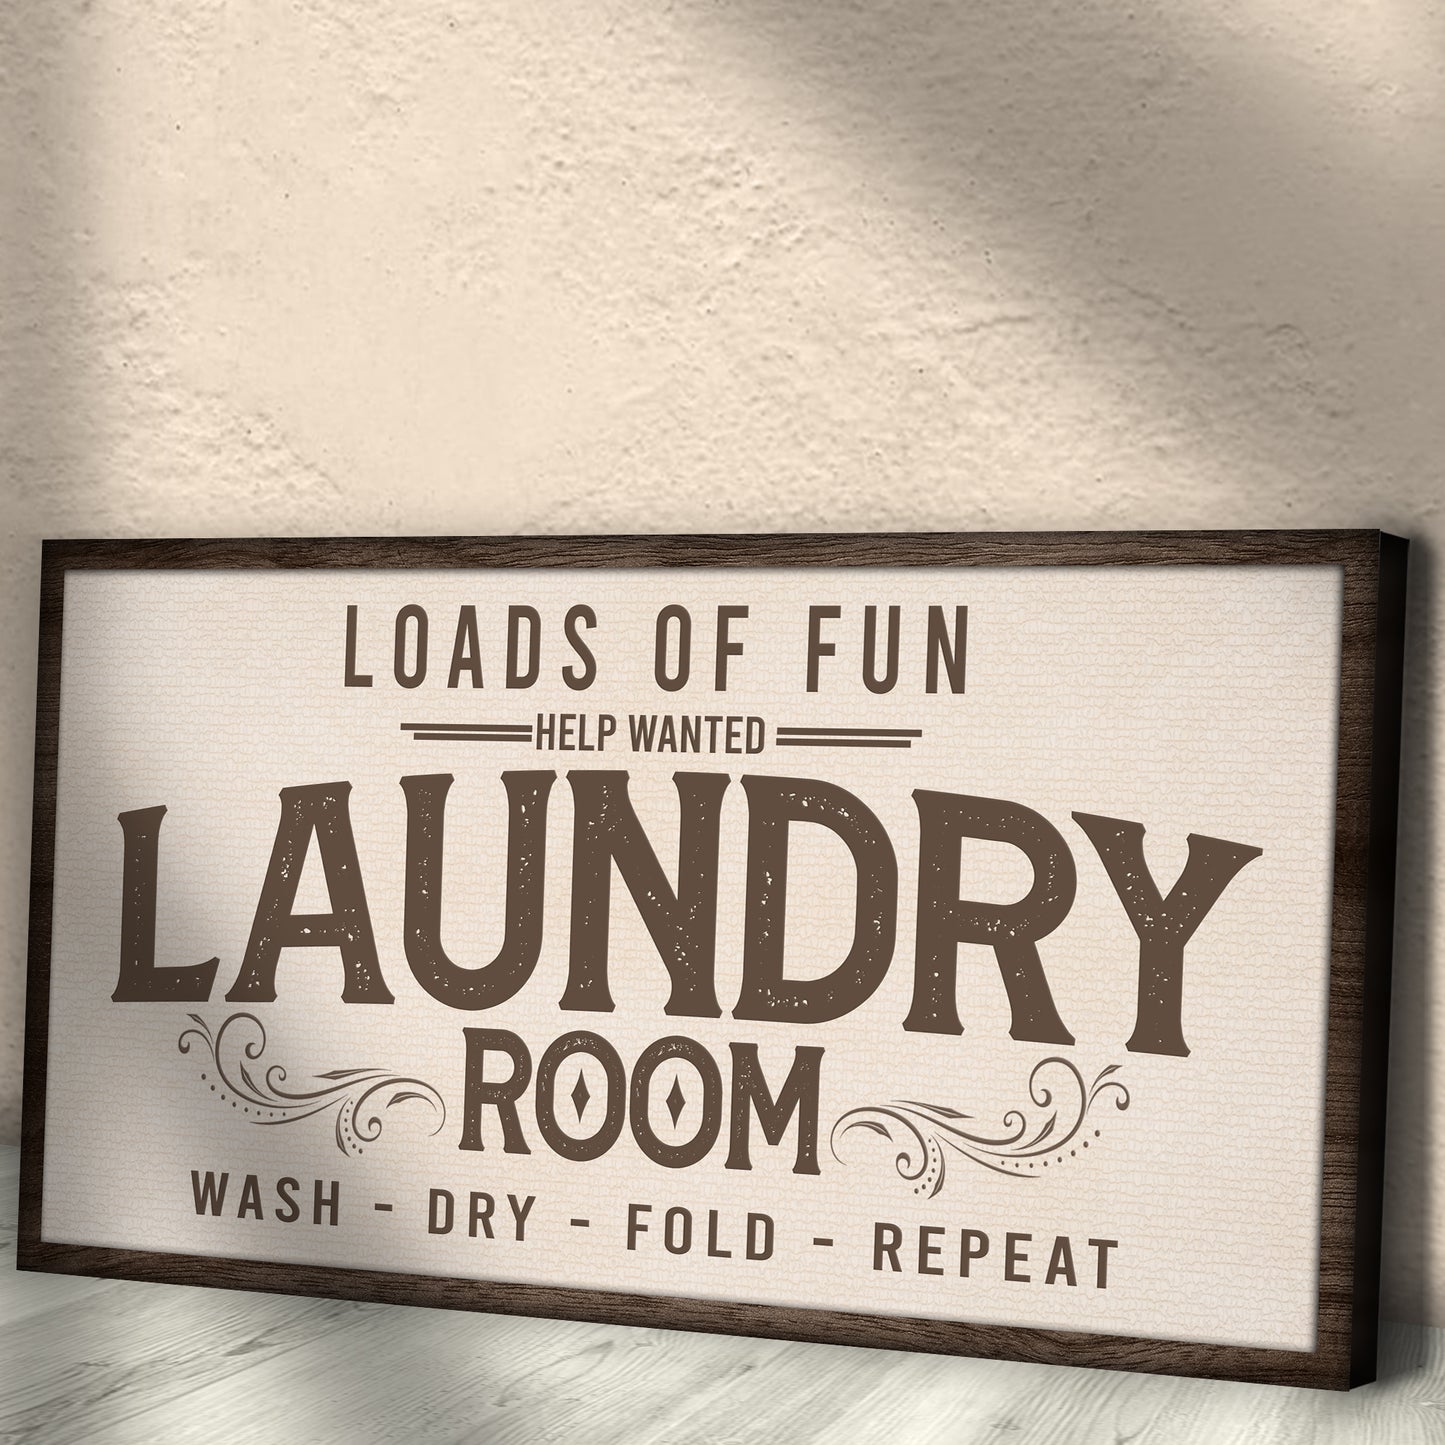 Loads of Fun Help Wanted Laundry Room Sign Style 2 - Image by Tailored Canvases